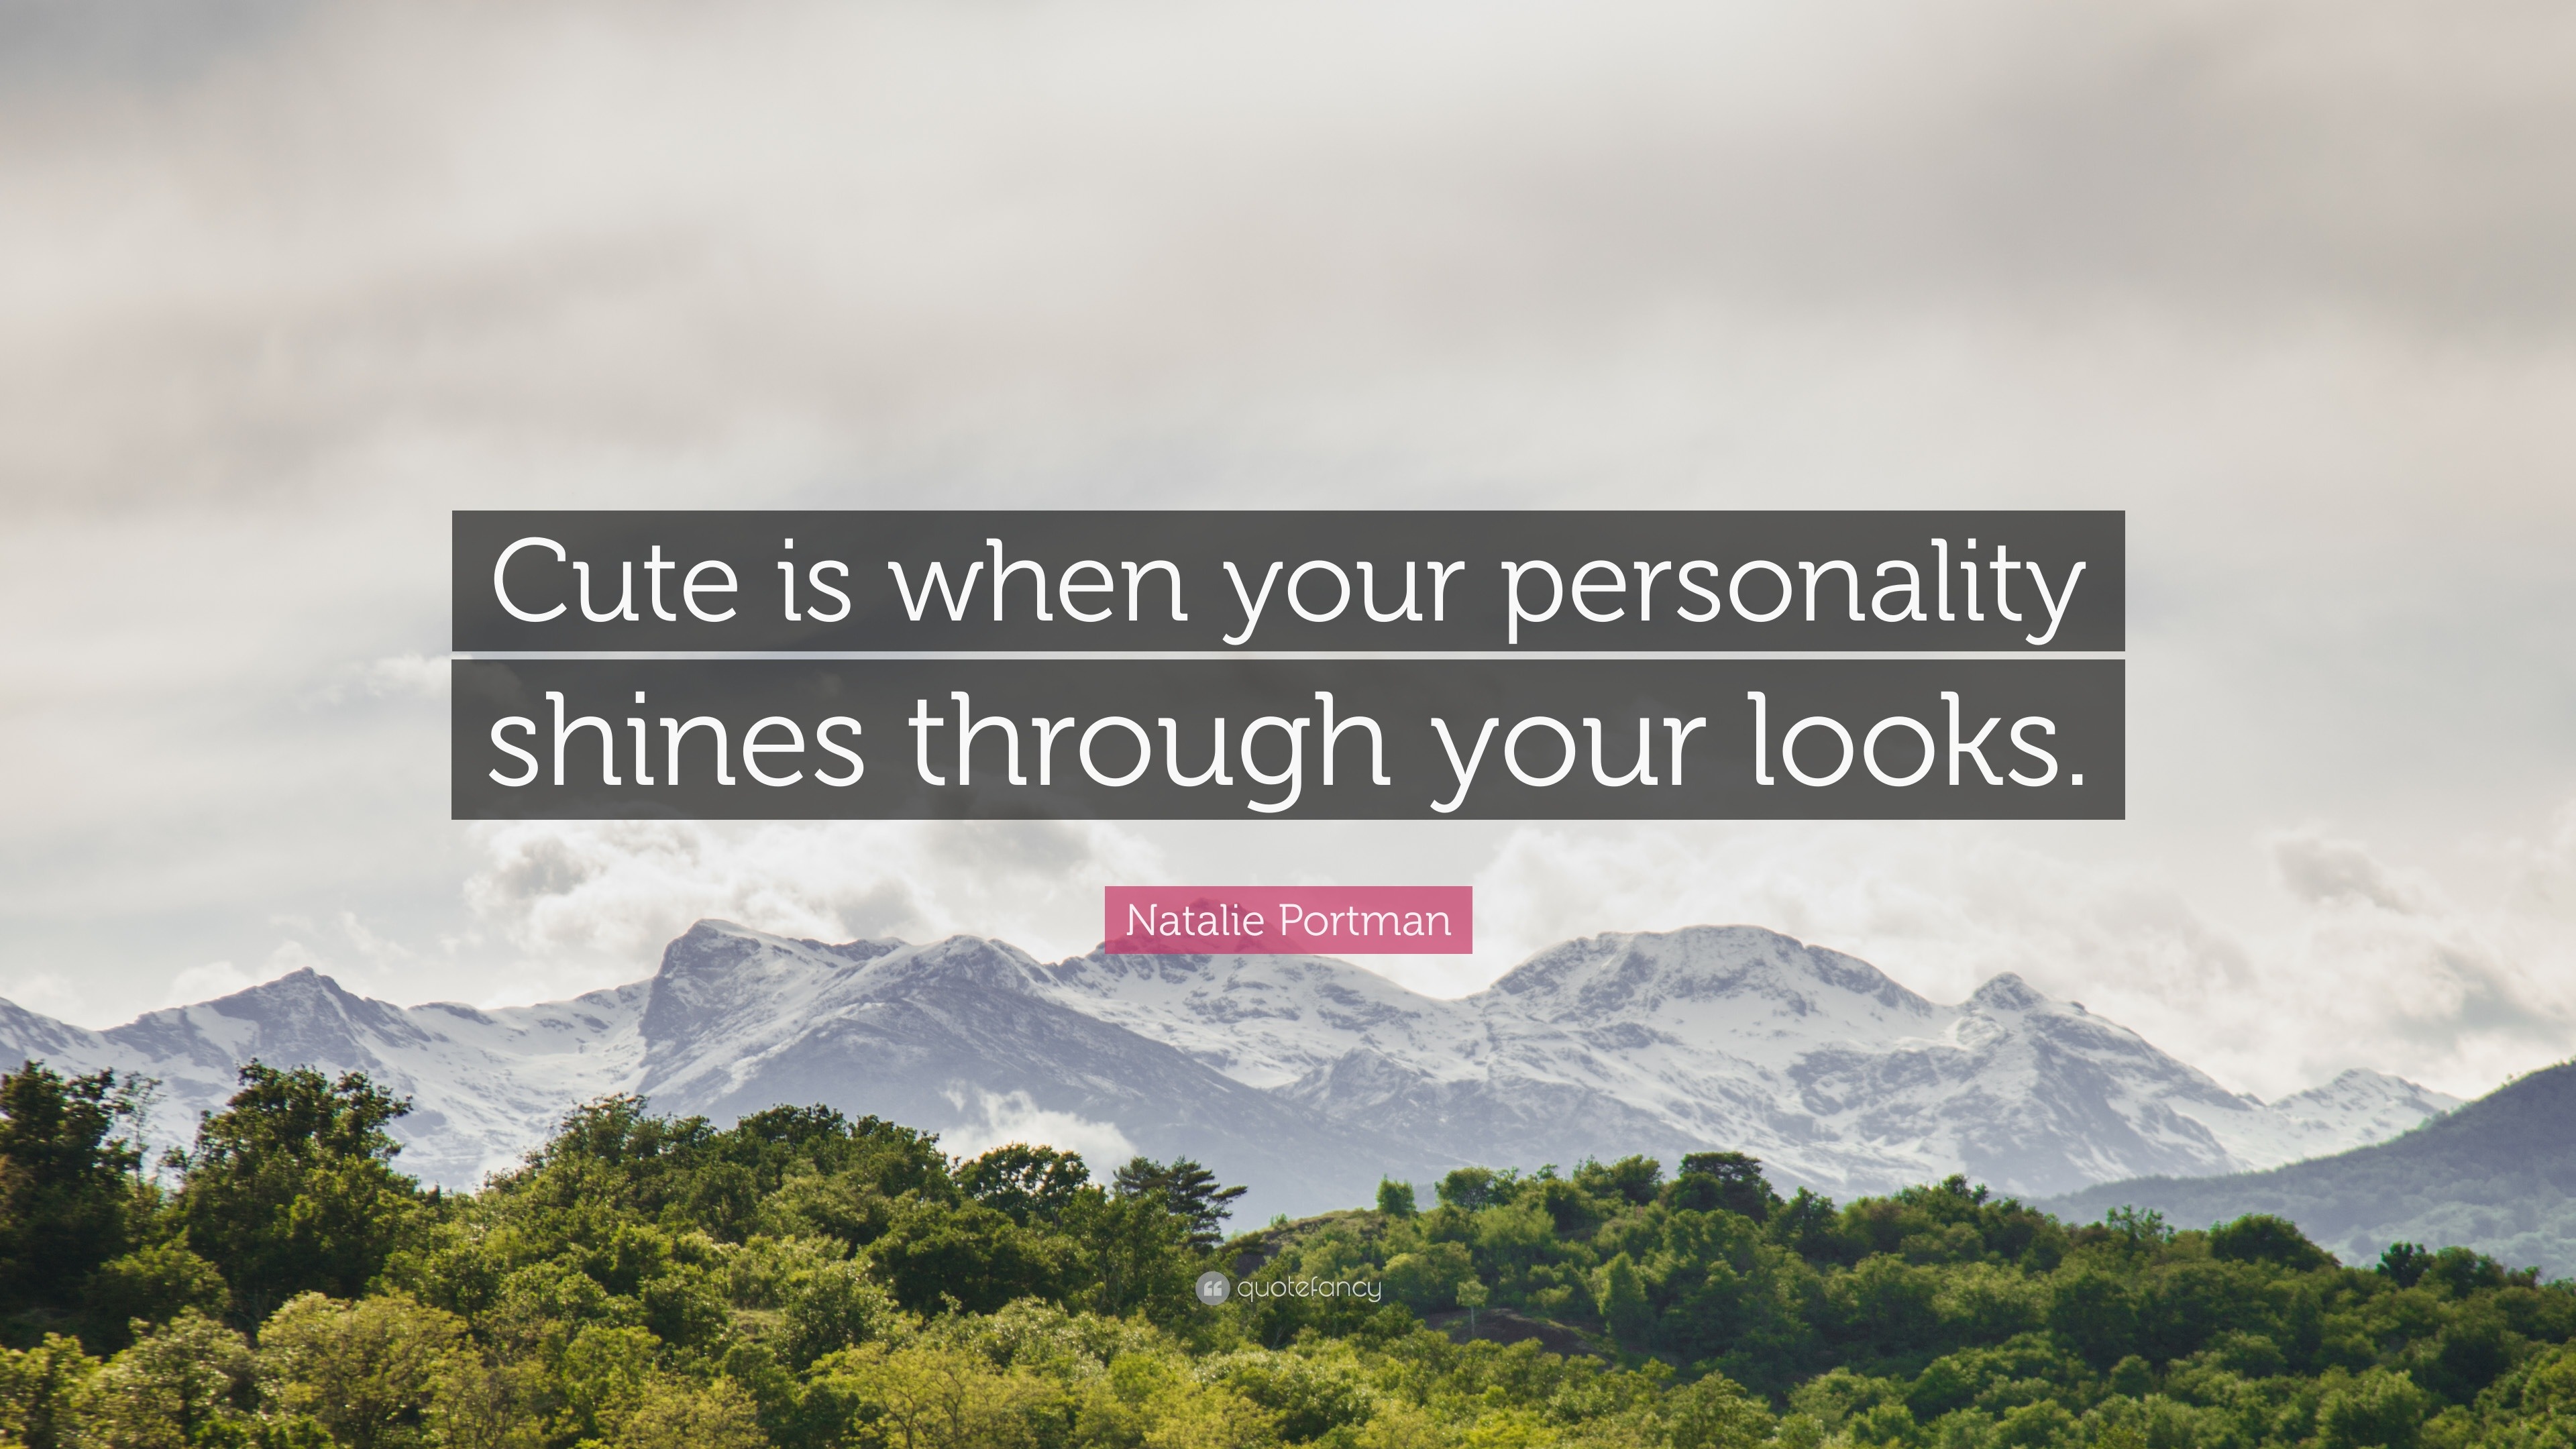 Natalie Portman Quote: “Cute is when your personality shines ...